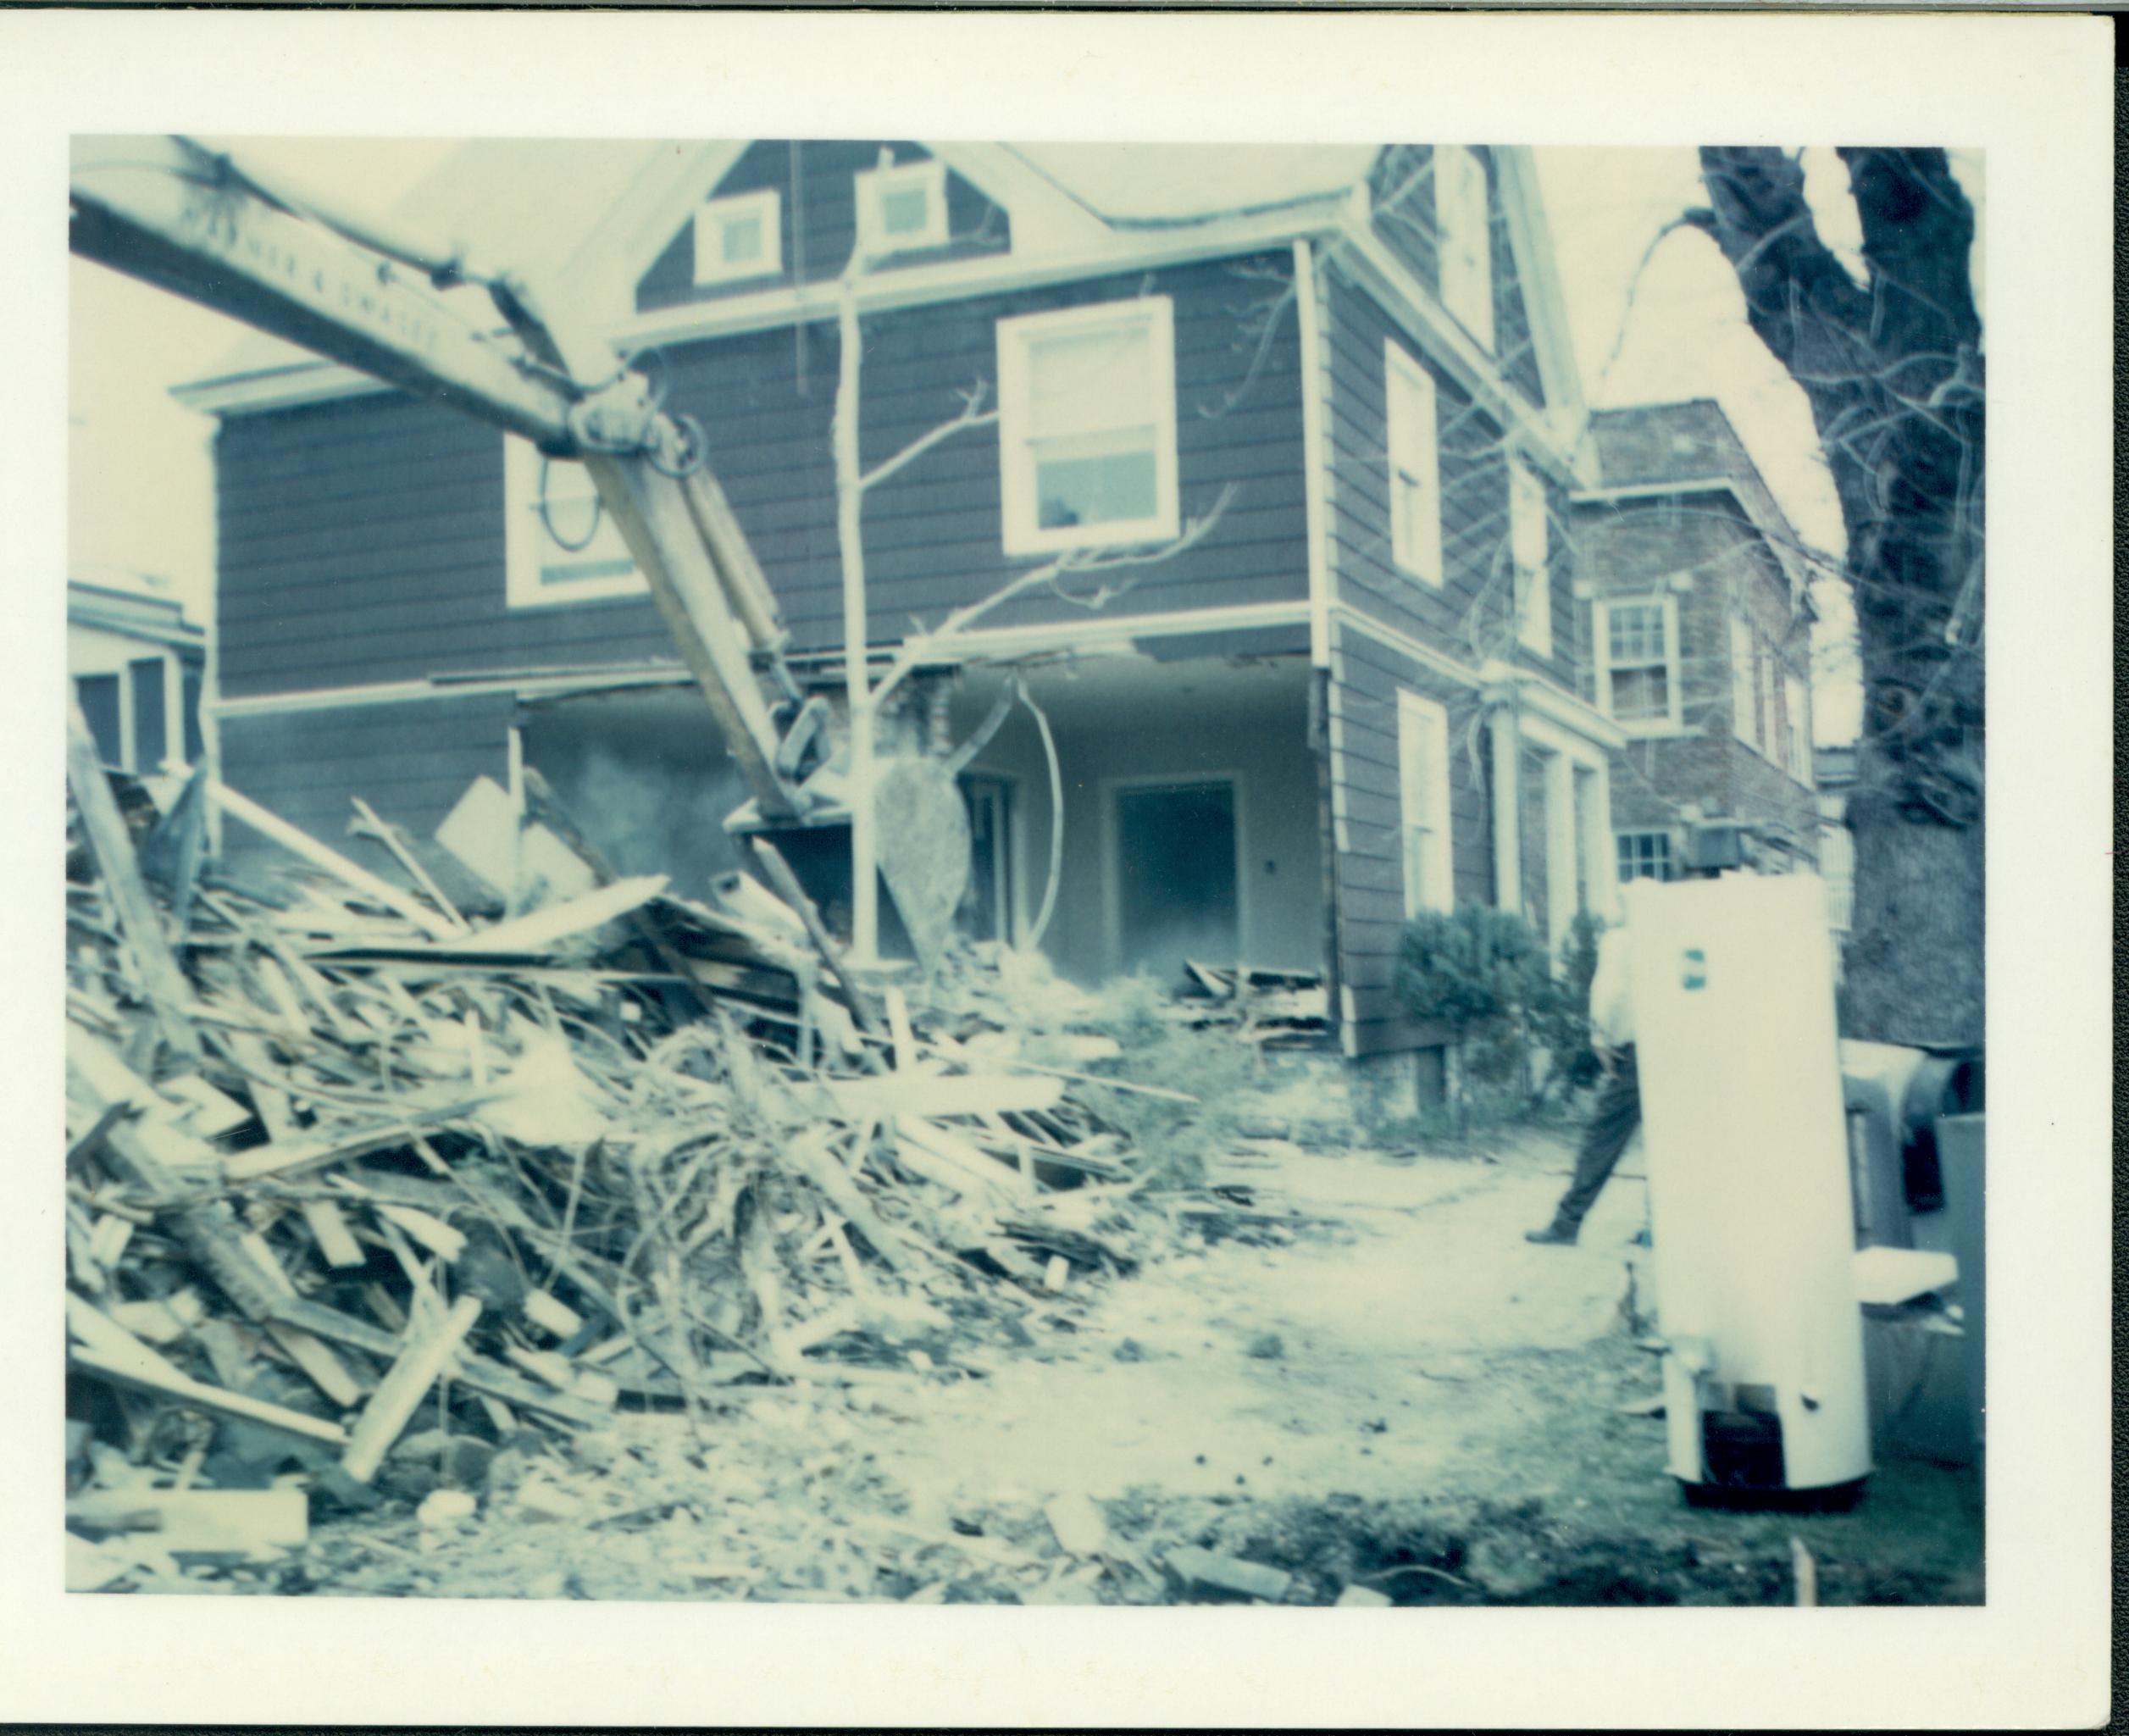 Duplex owned by William Sheeham in process of being razed, Block 7, Lot 8 along Jackson Street. Clapboard house in background owned by William Hermes.  Brick building in background right owned by Herman Hofferkamp. Area is now Visitor Center.  Old water heater on curb on far right. Looking East/Northeast from 7th and Jackson Street. Sheeham, Hermes, Hofferkamp, Jackson Street, Visitor Center, razing